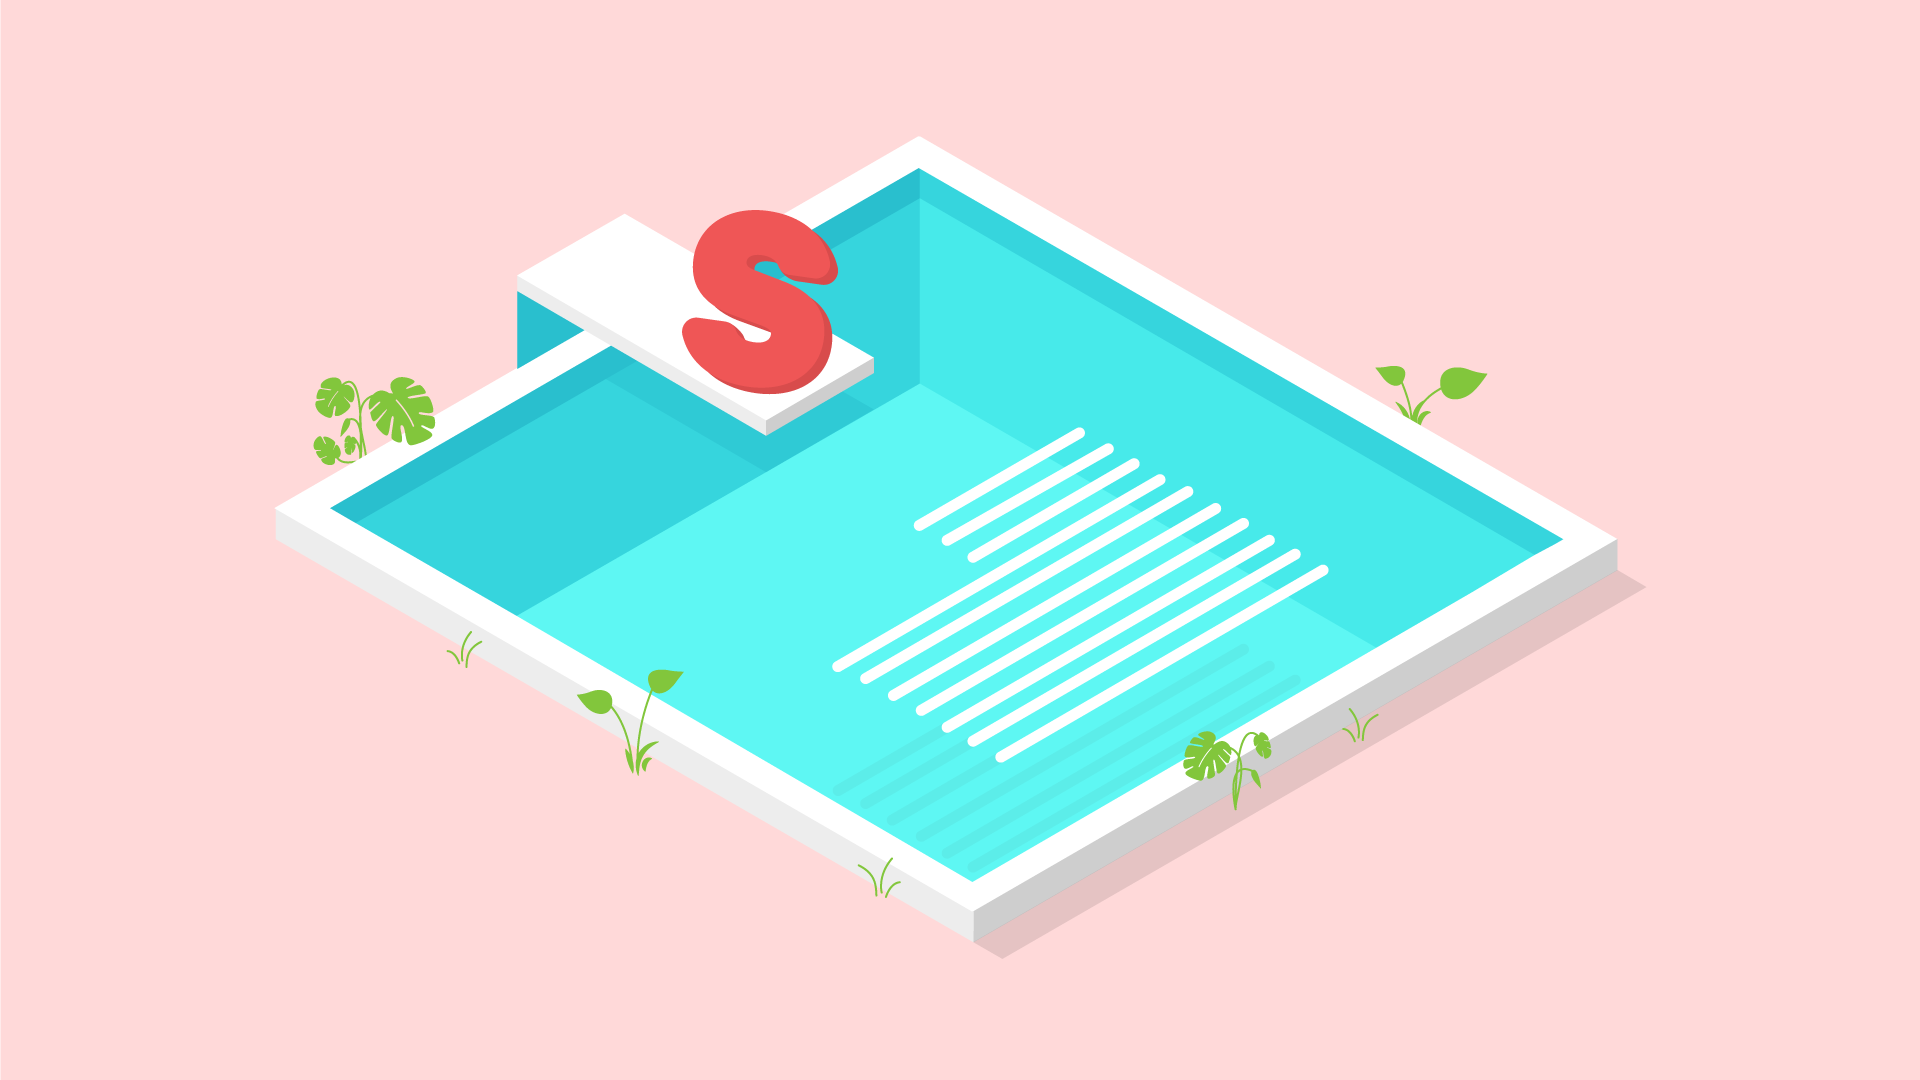 A letter S sits on the springboard of a swimming pool, waiting to join the lines of text that are already in the water